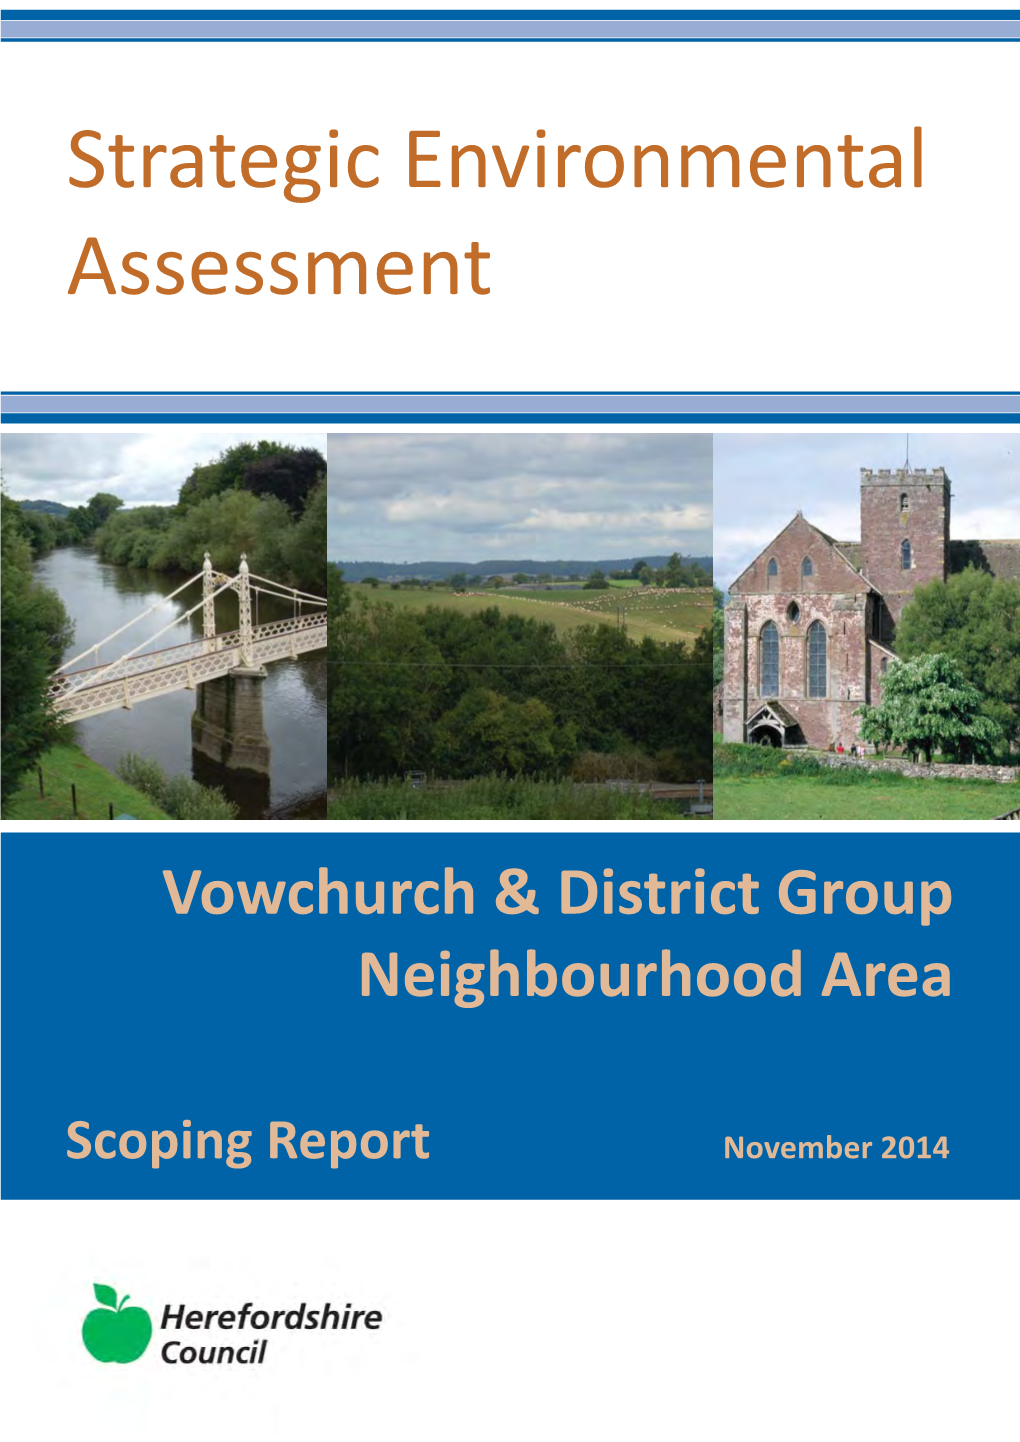 Vowchurch and District Group Strategic Environmental Assessment